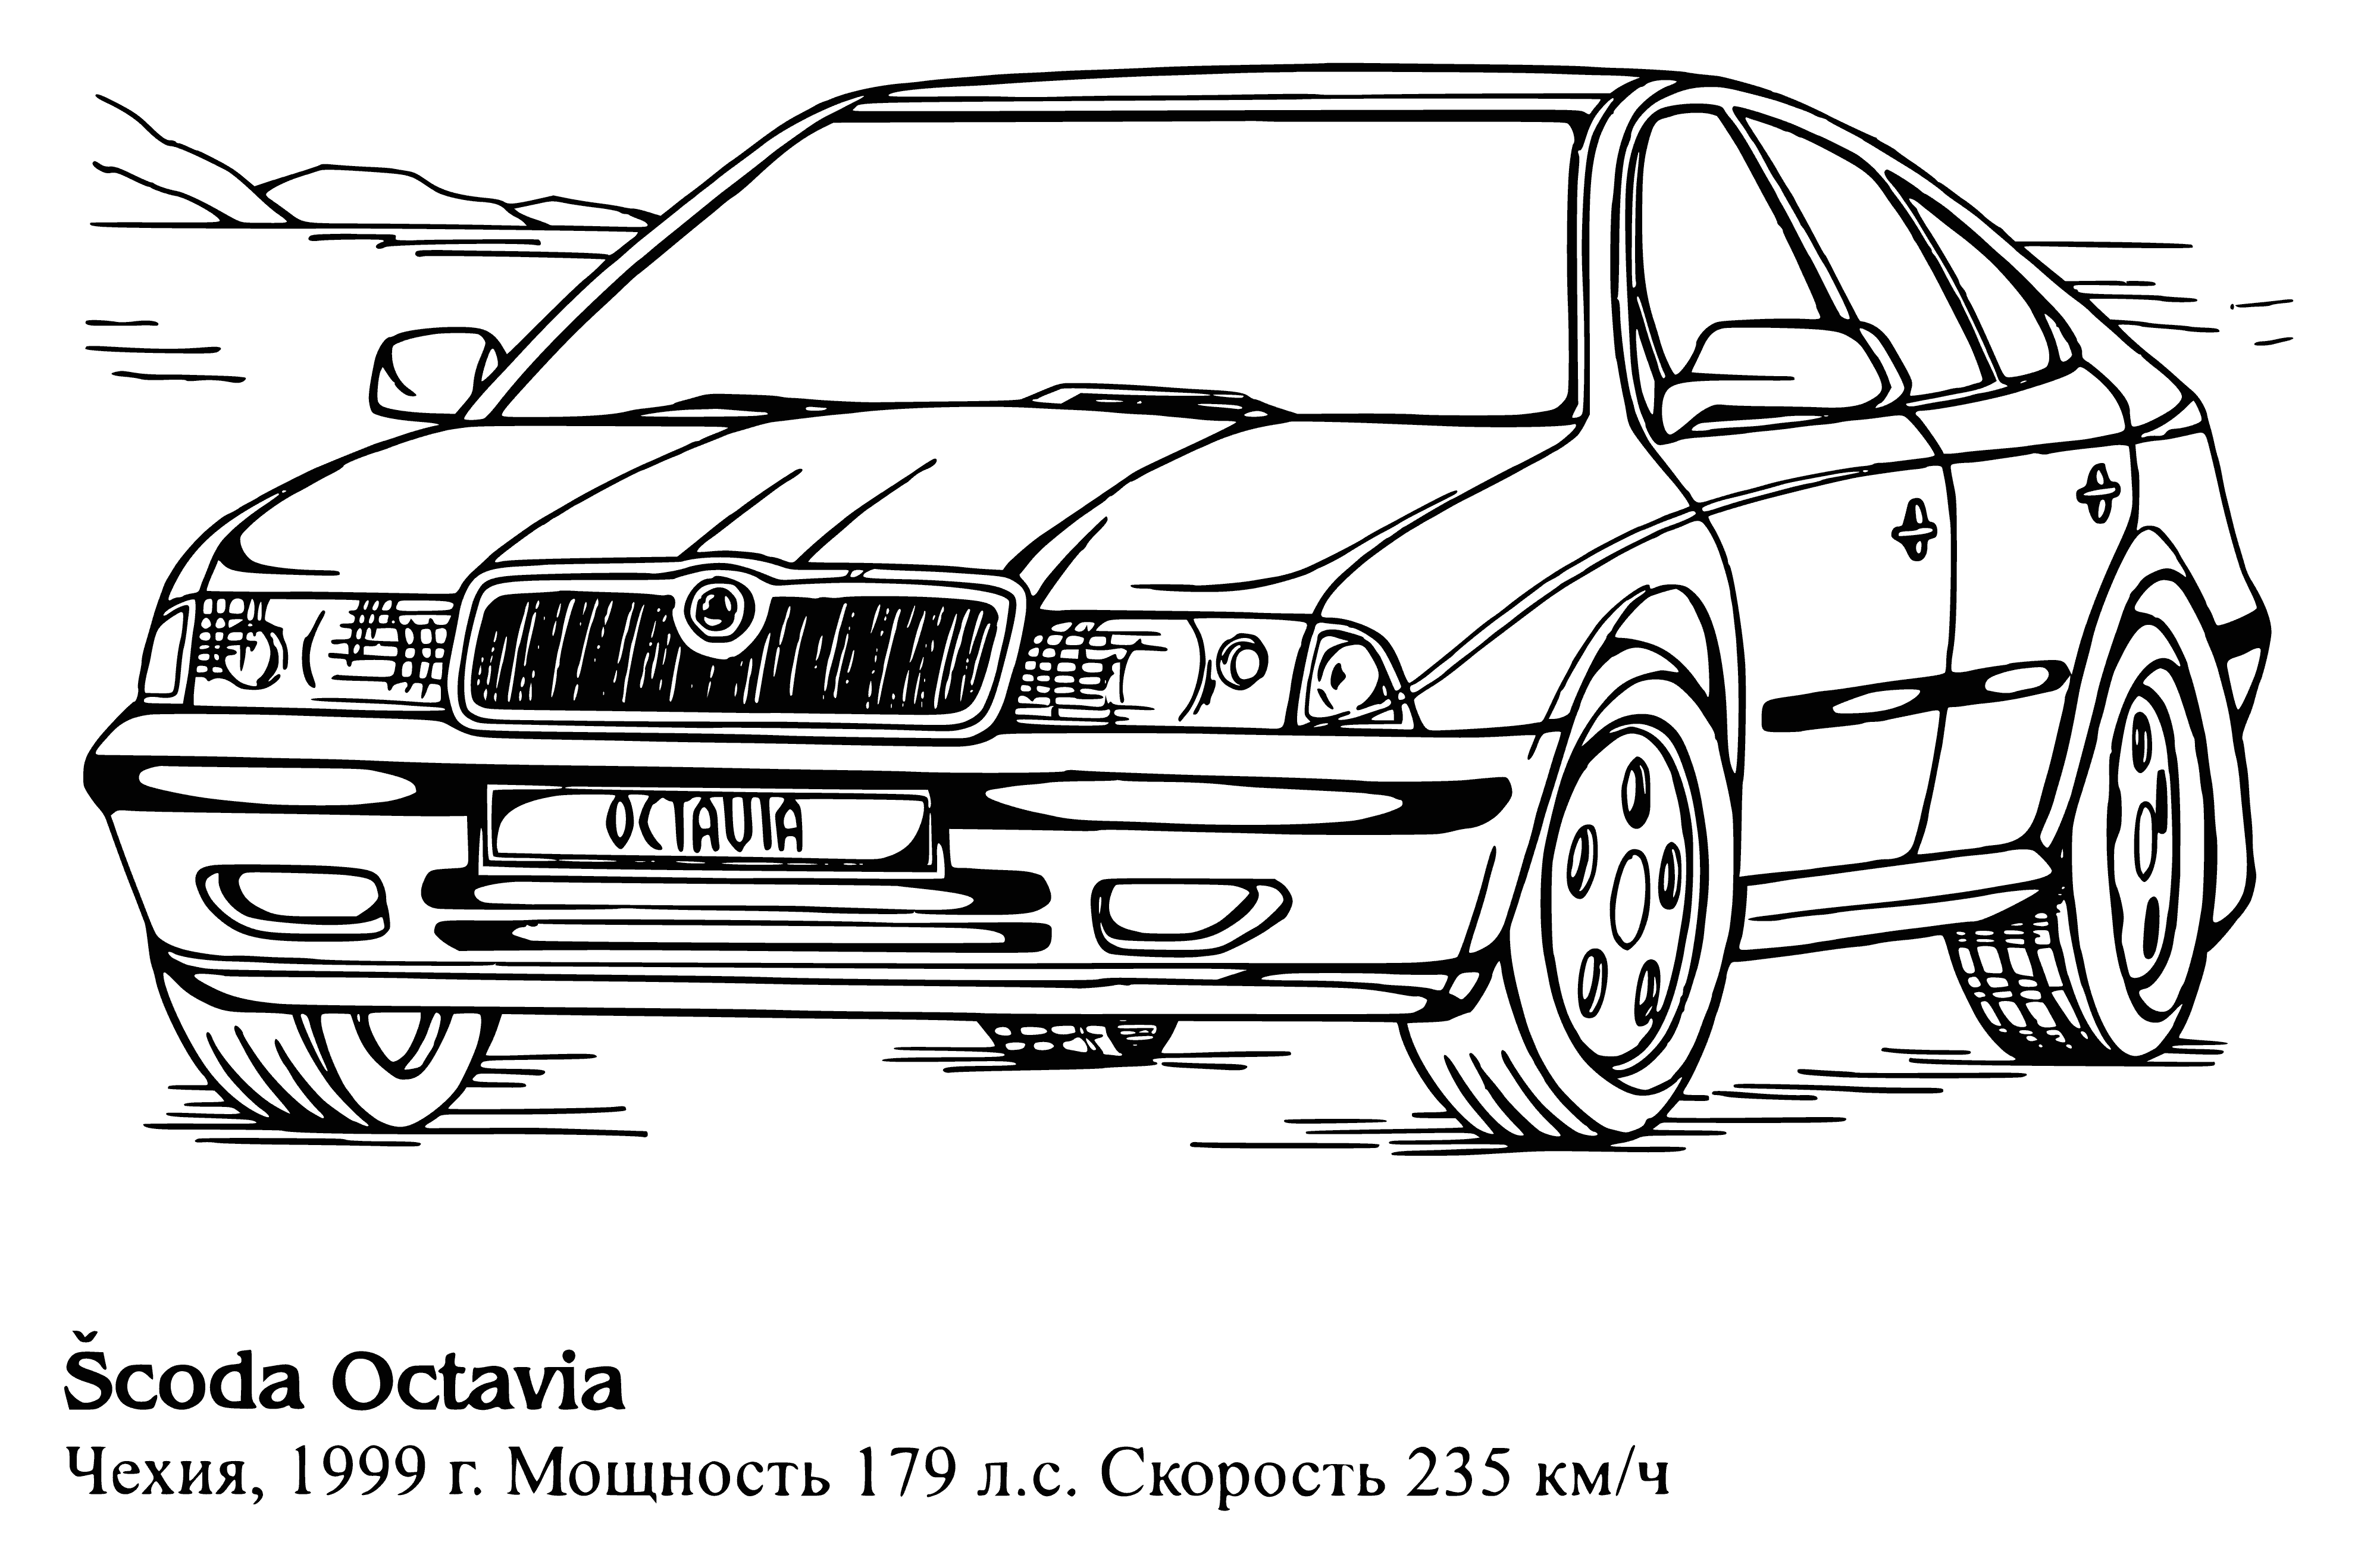 coloring page: Eye-catching white sedan with 'Scoda' logo and 'Octavia' written on rear. Four doors, tinted windows, fog lights on front.